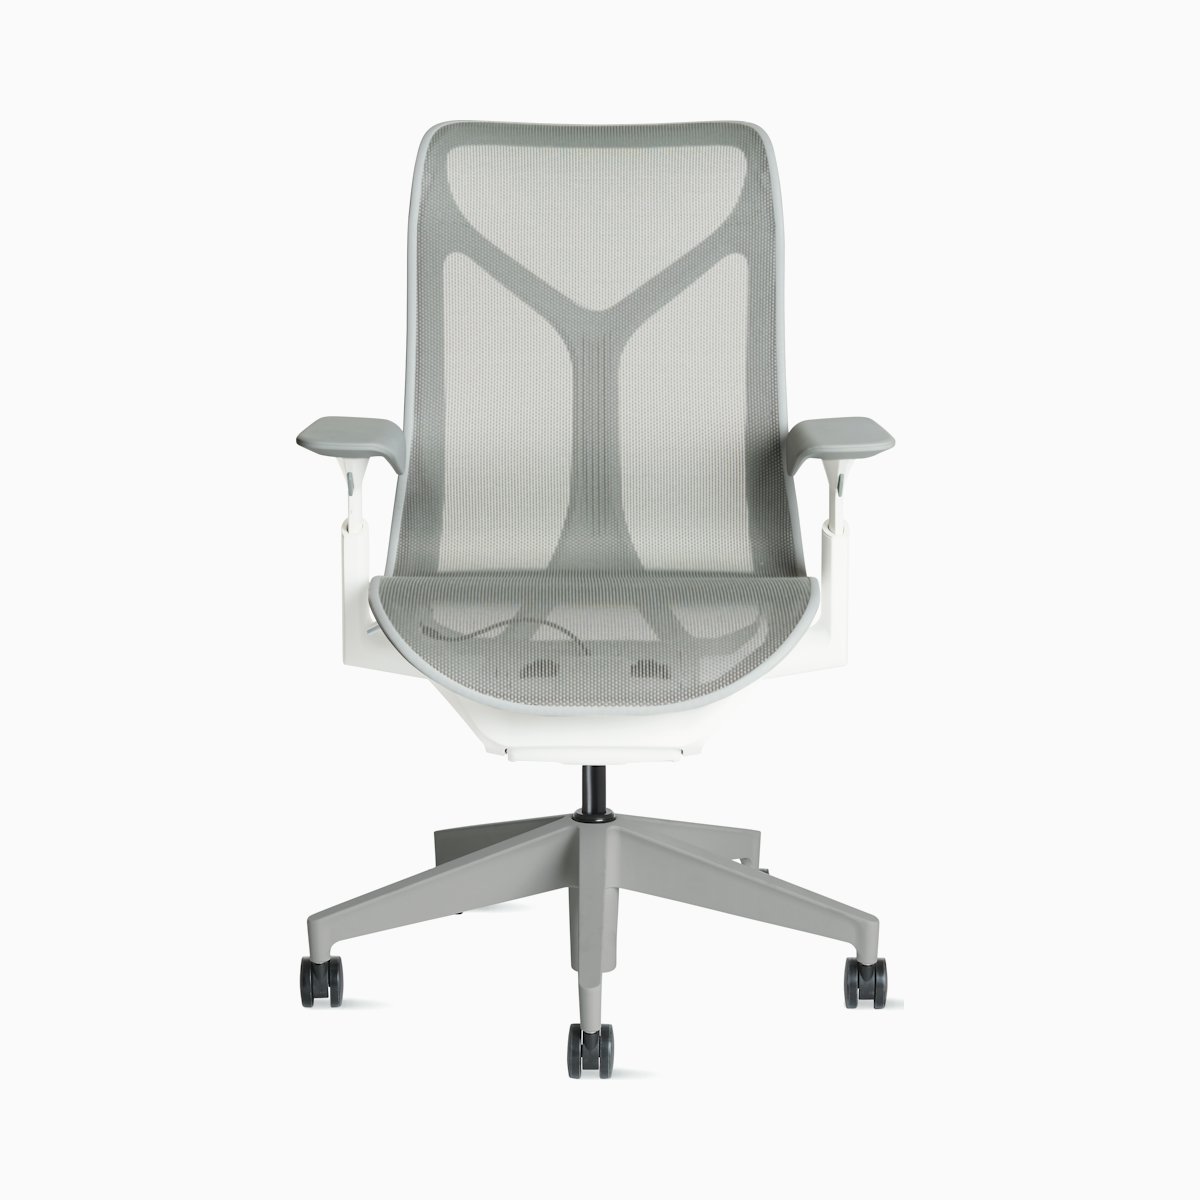 Ergonomic Home Office Chairs: Performance Seating - Herman Miller 